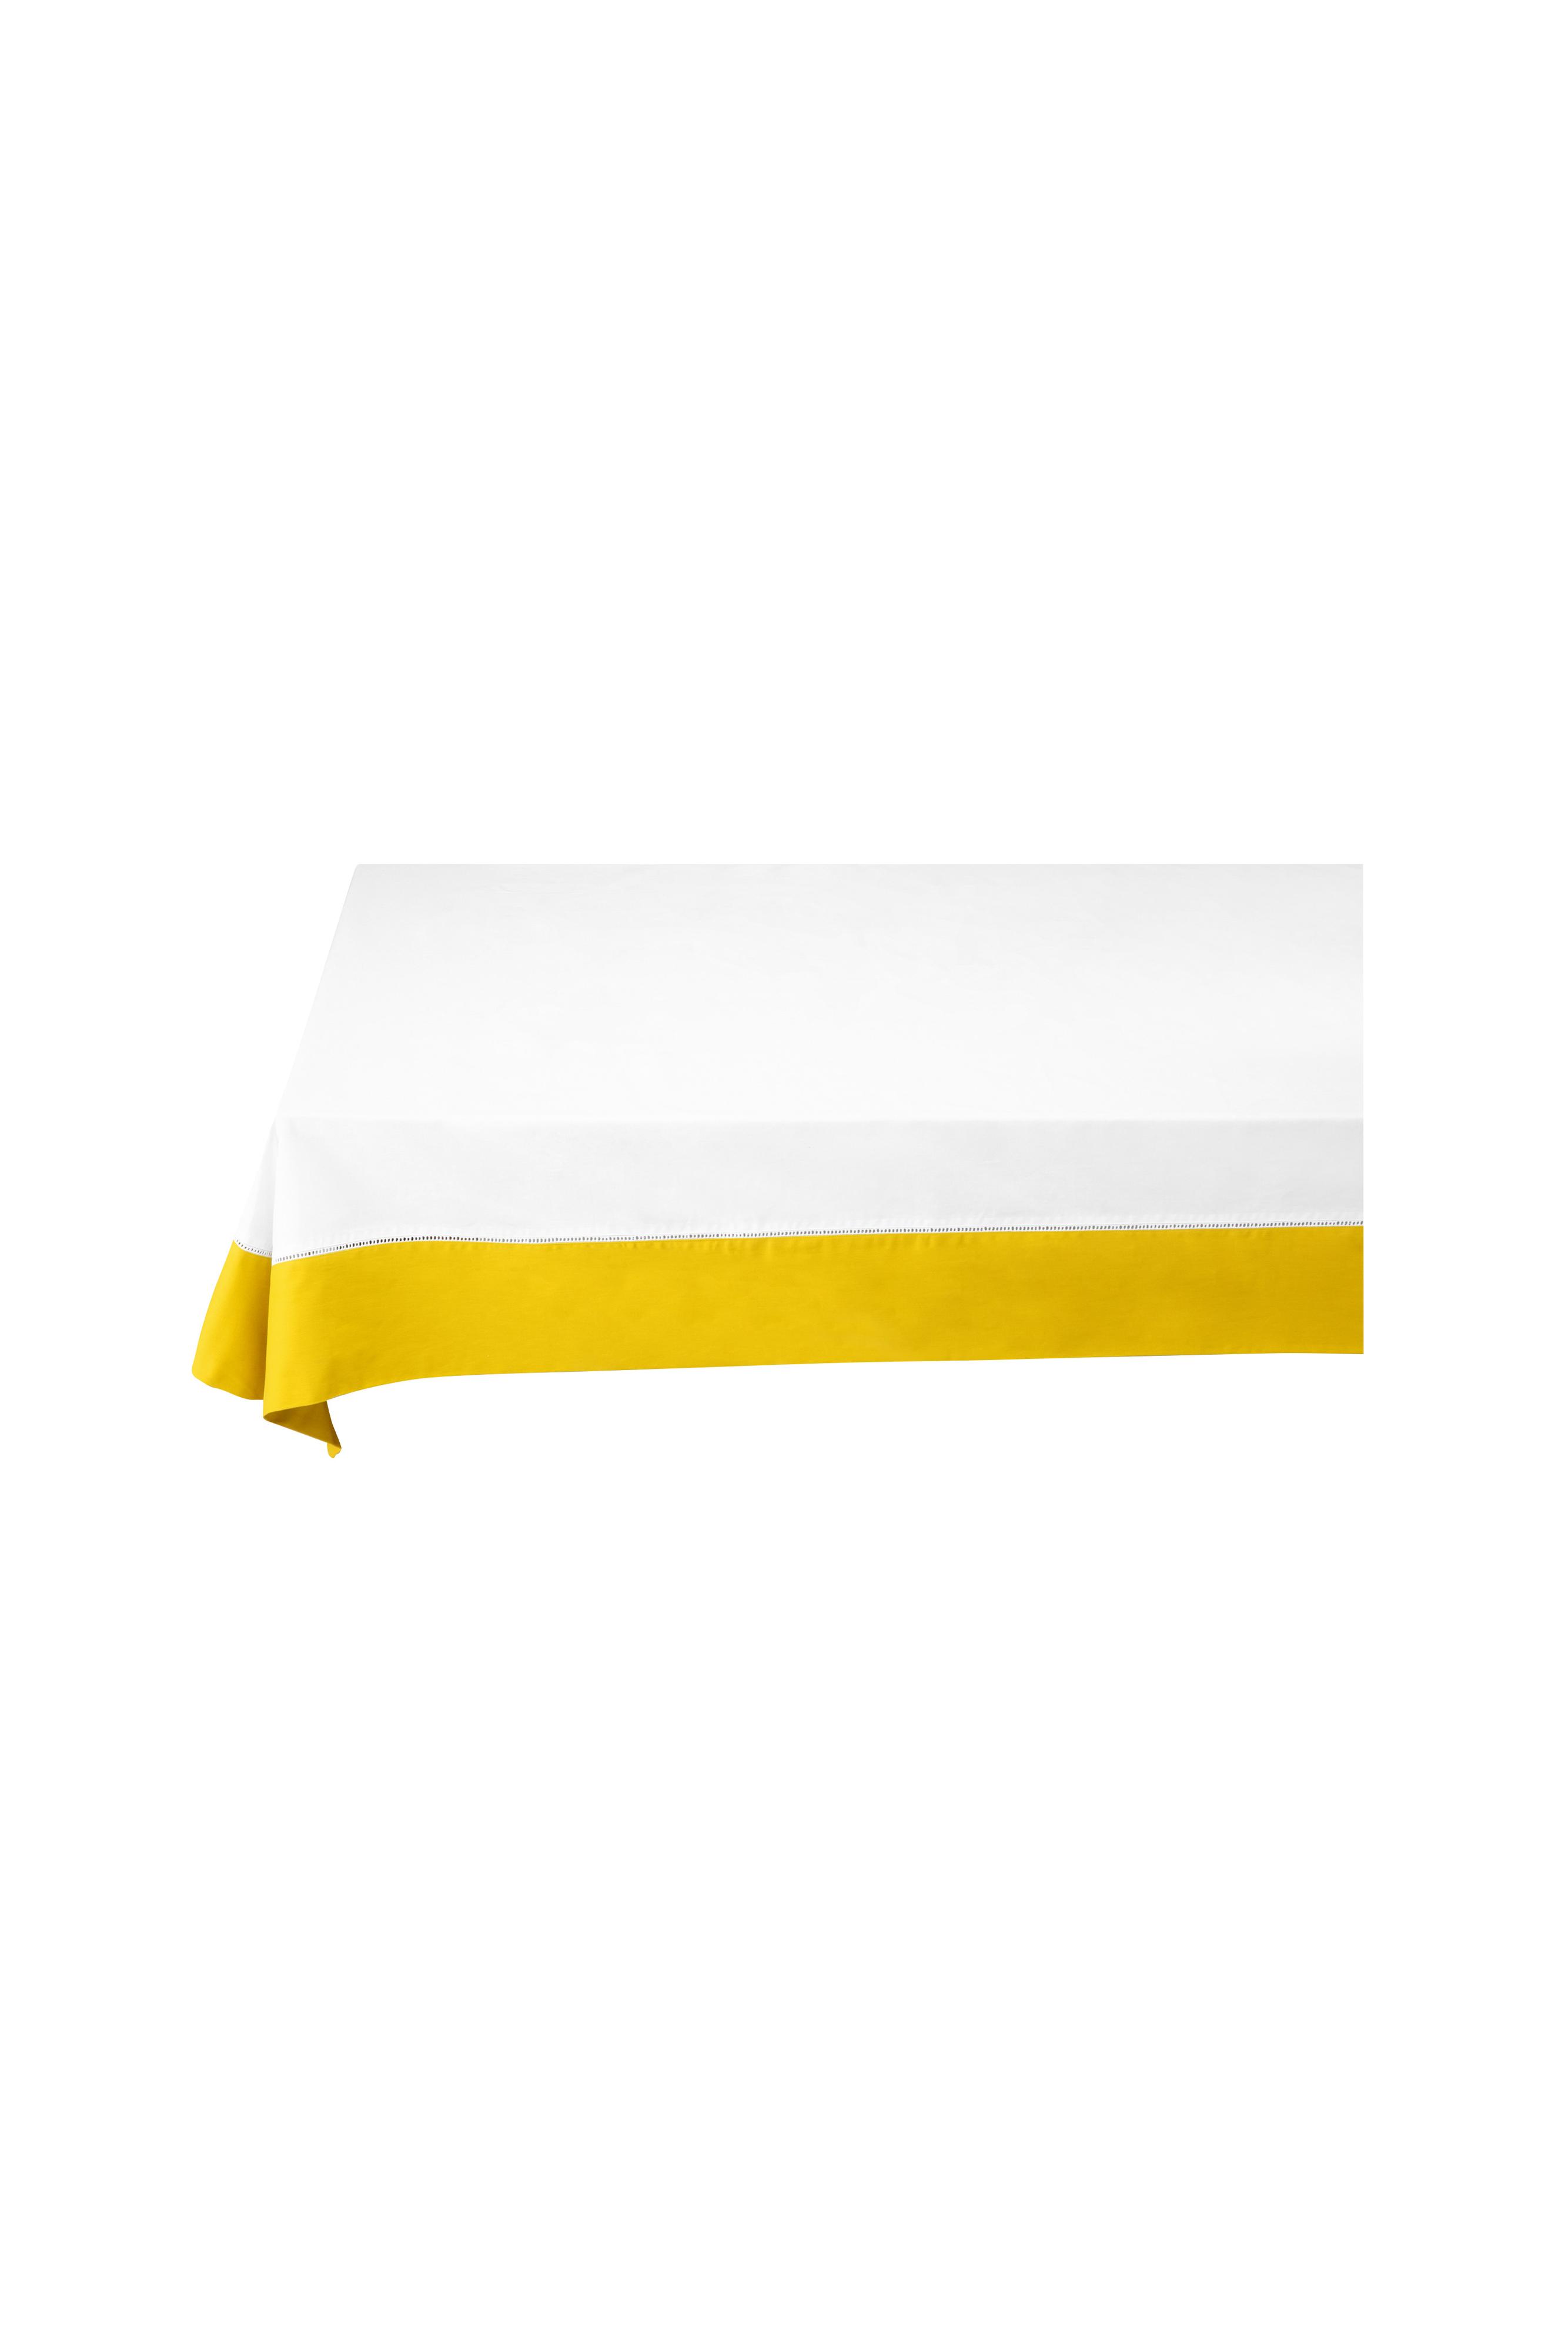 Table Cloth Pip Chique Yellow 160x310cm Gift